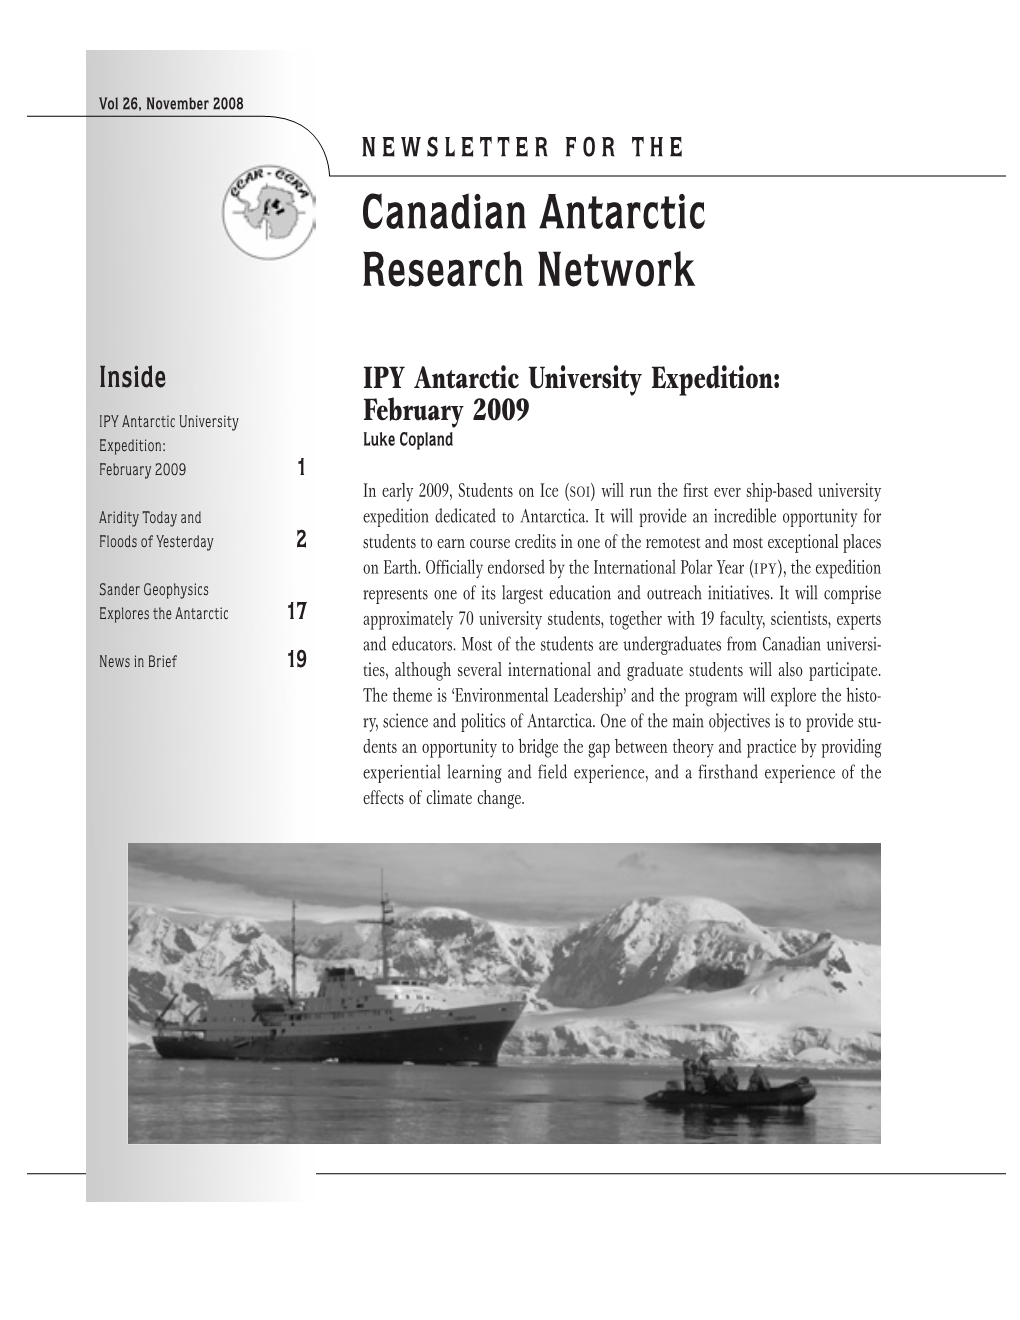 Canadian Antarctic Research Network